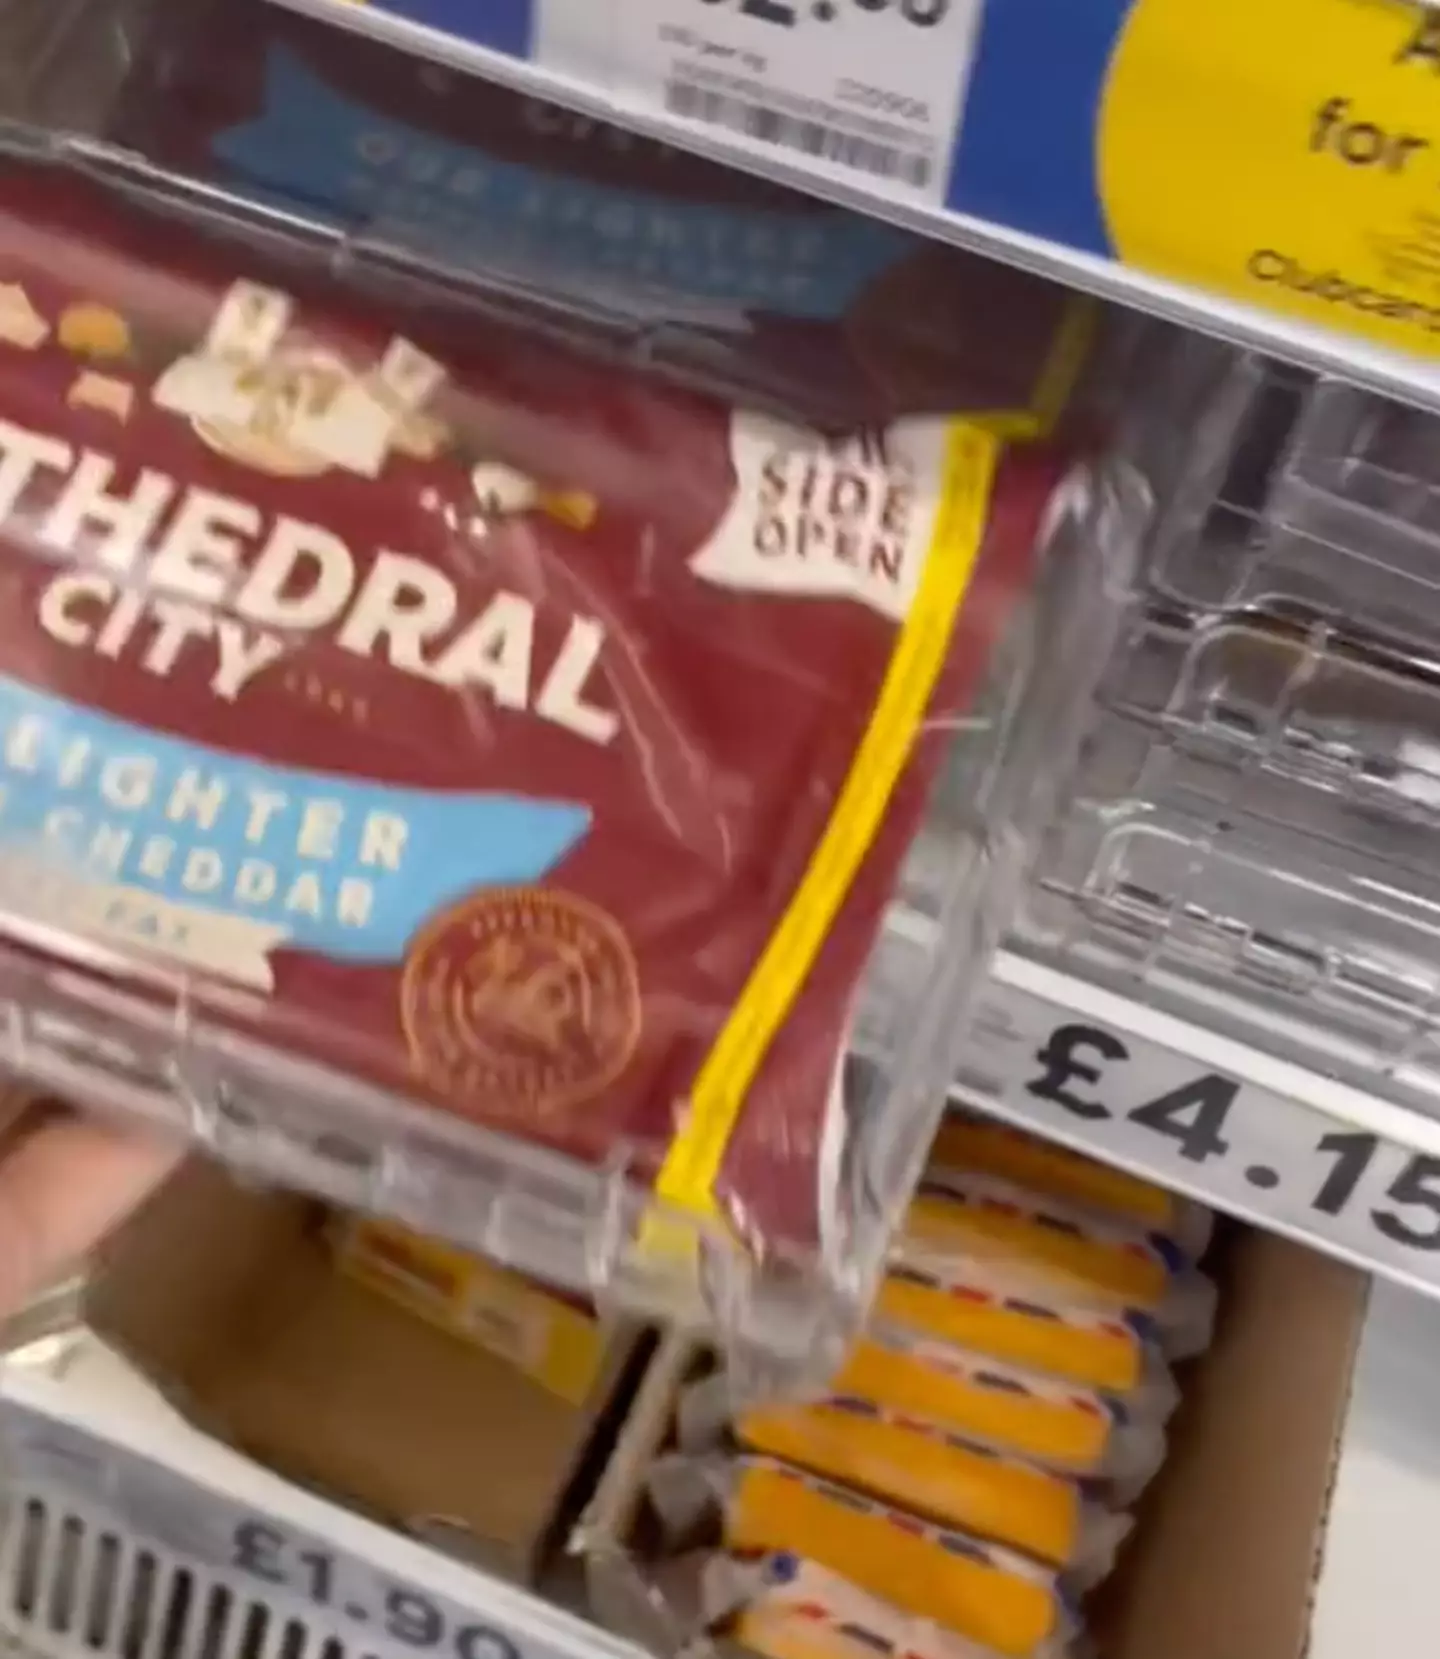 People were shocked to see the cheese being kept in security cases.